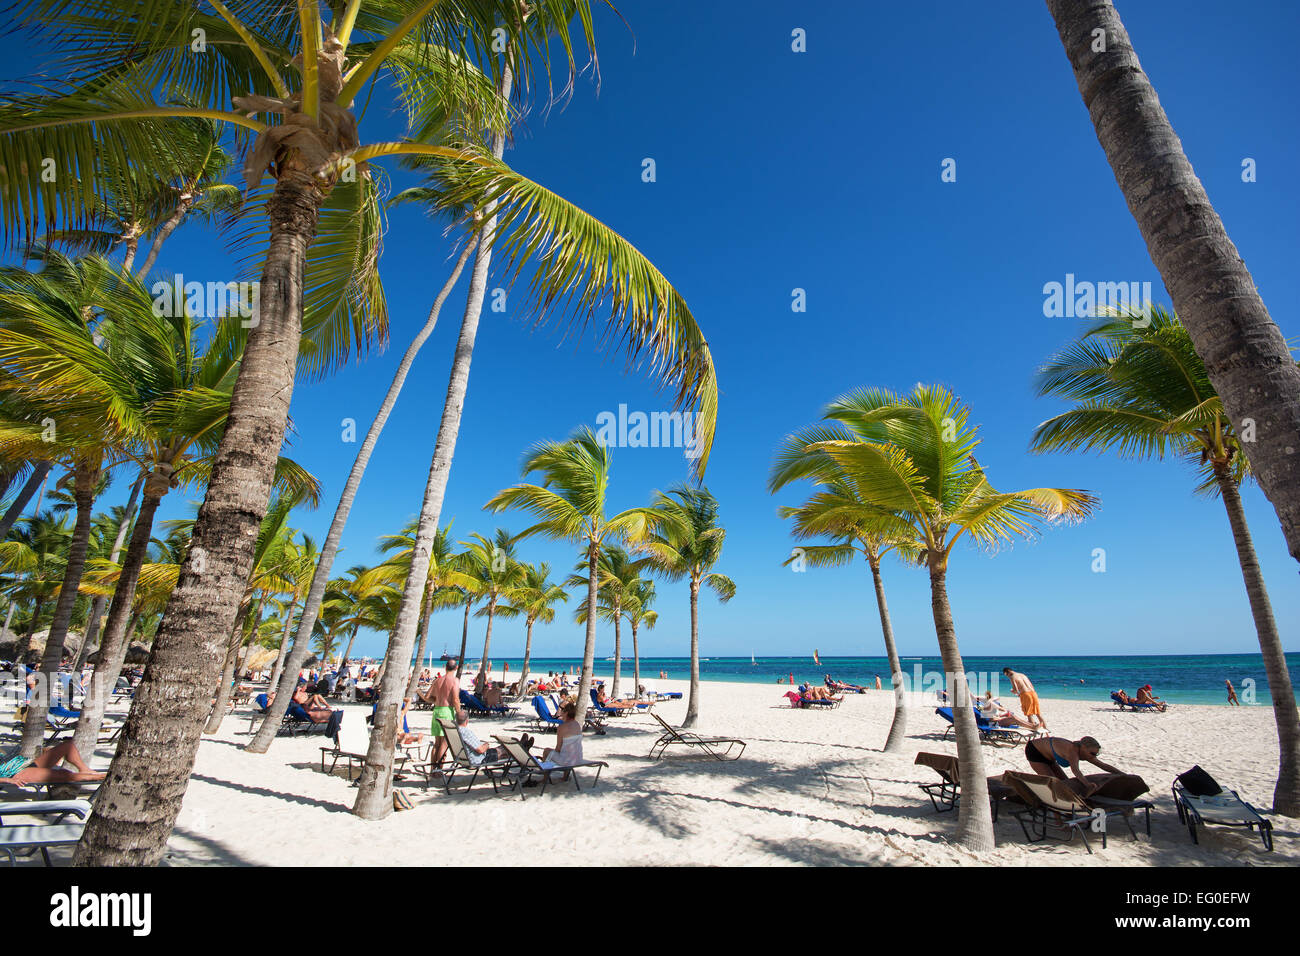 DOMINICAN REPUBLIC. Secrets Royal Beach adults-only resort at Punta Cana on the east coast. 2015. Stock Photo